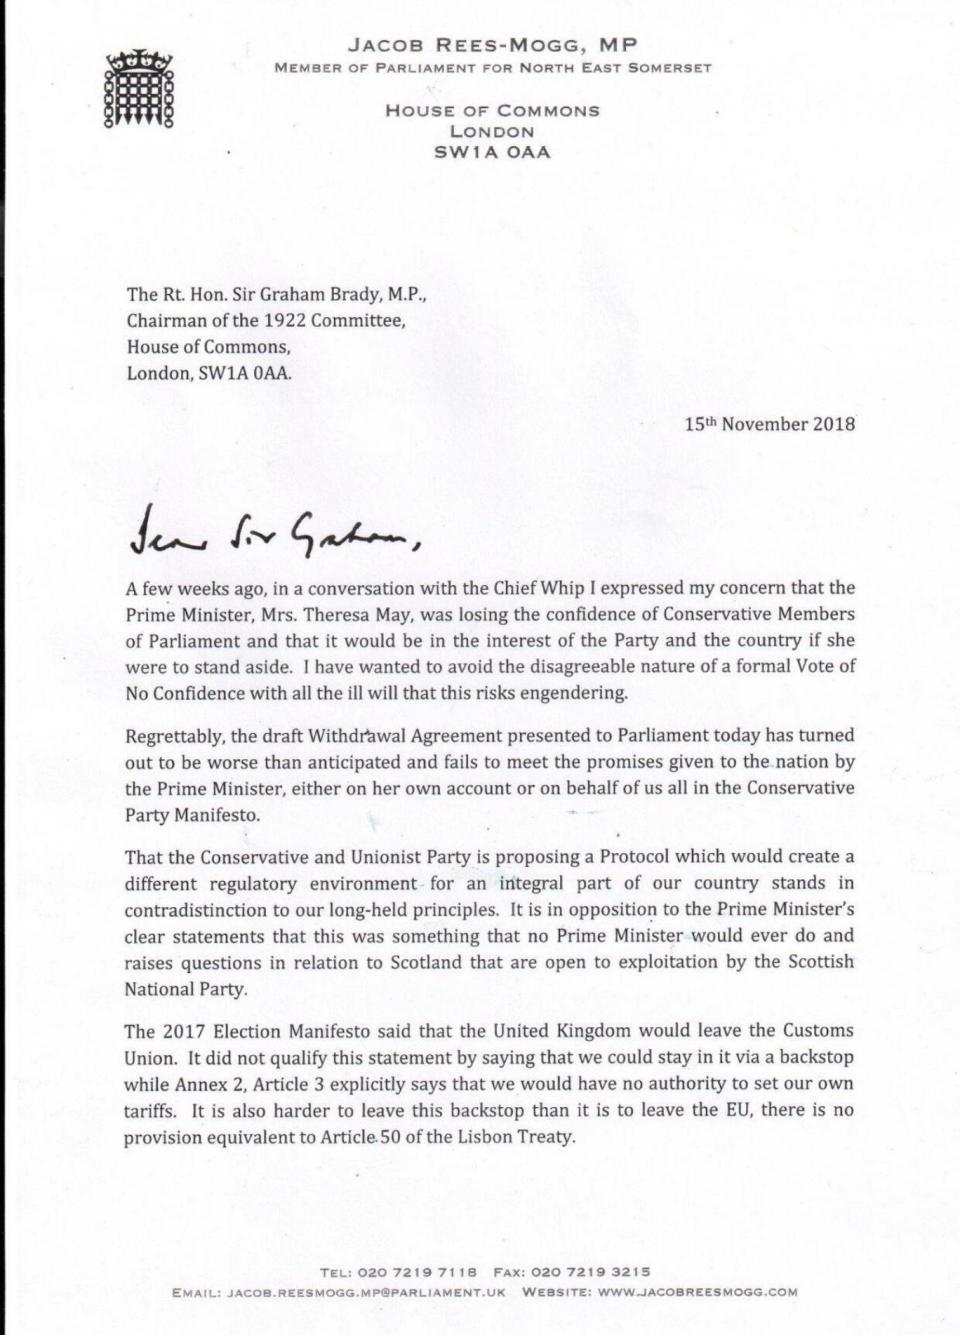 Jacob Rees-Mogg's letter of no confidence in the Prime Minister